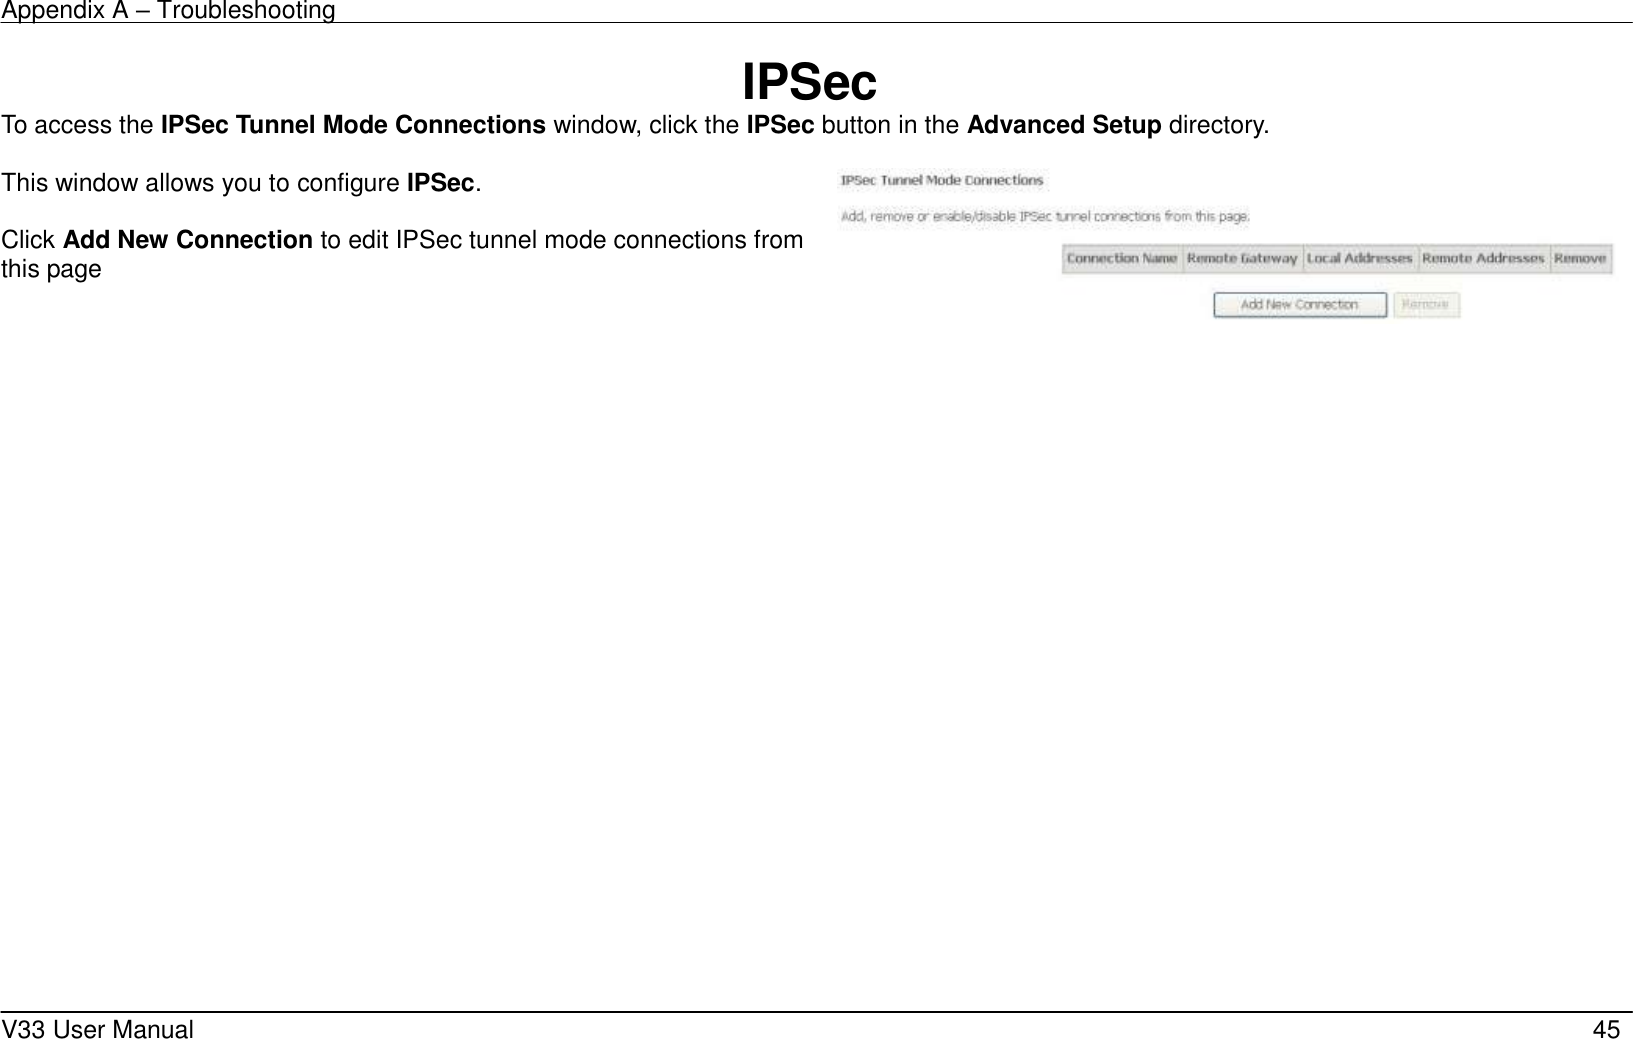 Appendix A – Troubleshooting    V33 User Manual   45 IPSec To access the IPSec Tunnel Mode Connections window, click the IPSec button in the Advanced Setup directory.  This window allows you to configure IPSec.  Click Add New Connection to edit IPSec tunnel mode connections from this page    